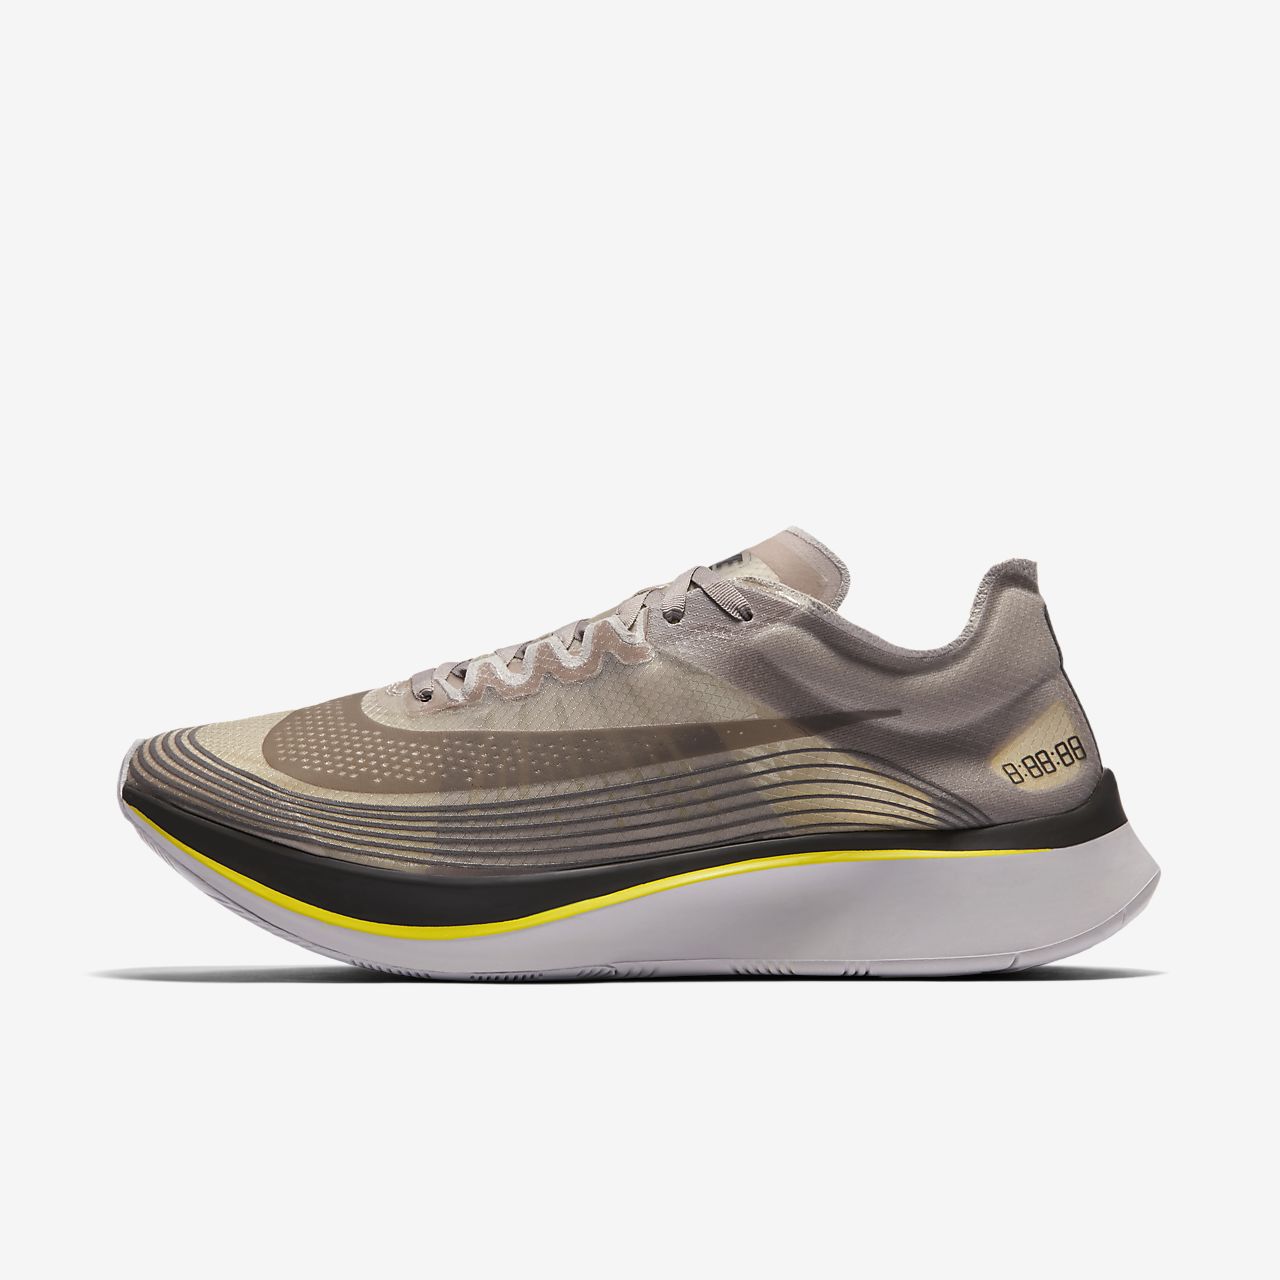 zoom fly sp weight